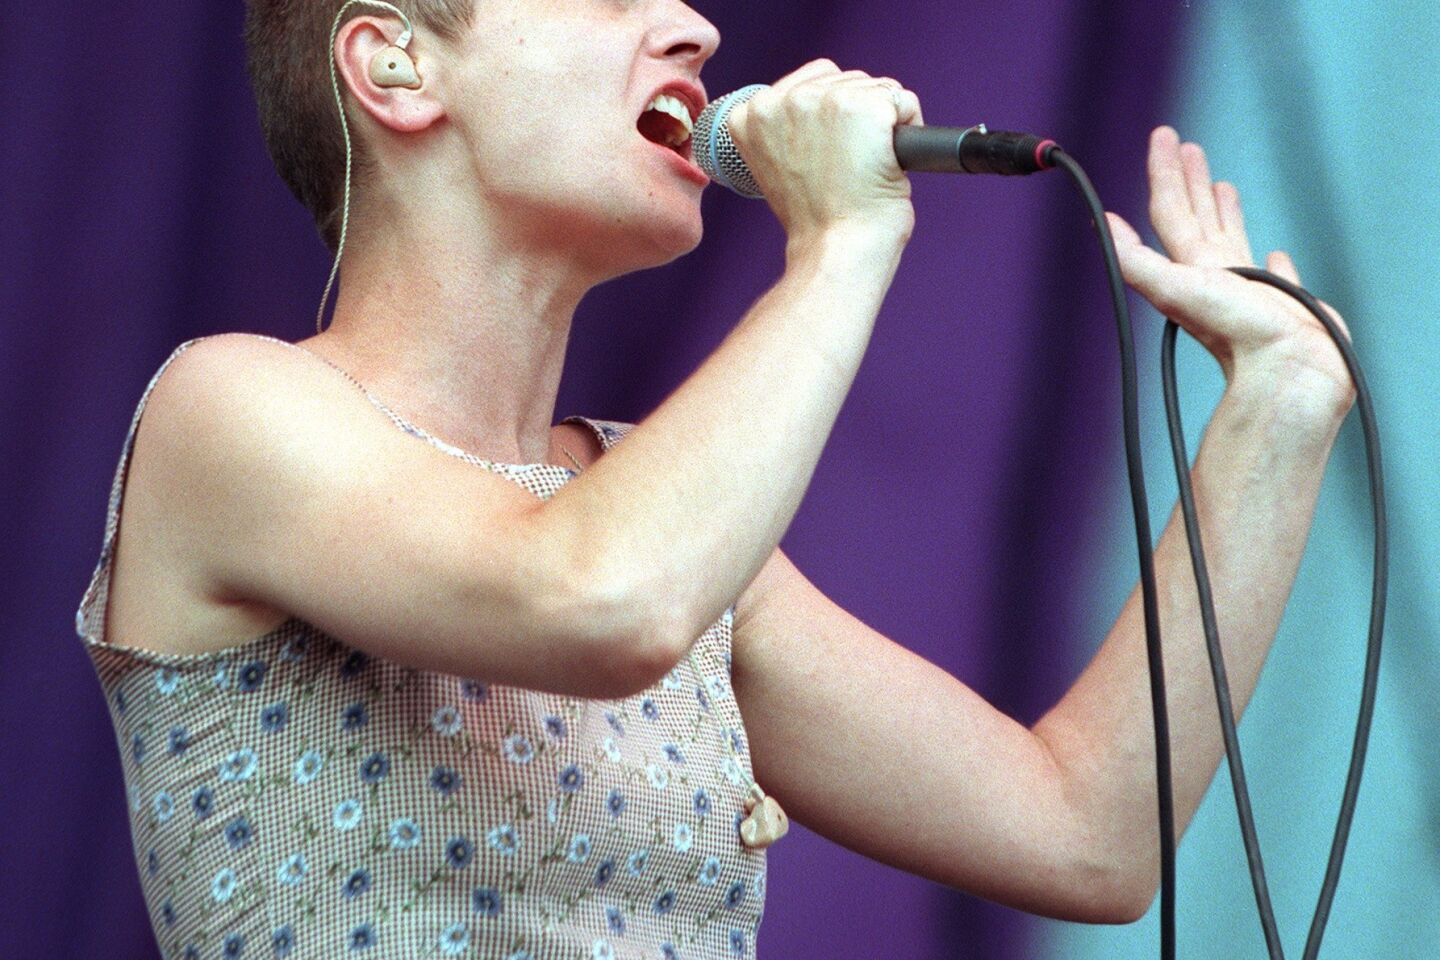 Despite a six-year gap between albums, Sinead O'Connor continued to make music and tour sporadically. In 1998 O'Connor performed a stand-out set at Lilith Fair at the Rose Bowl in Pasadena.